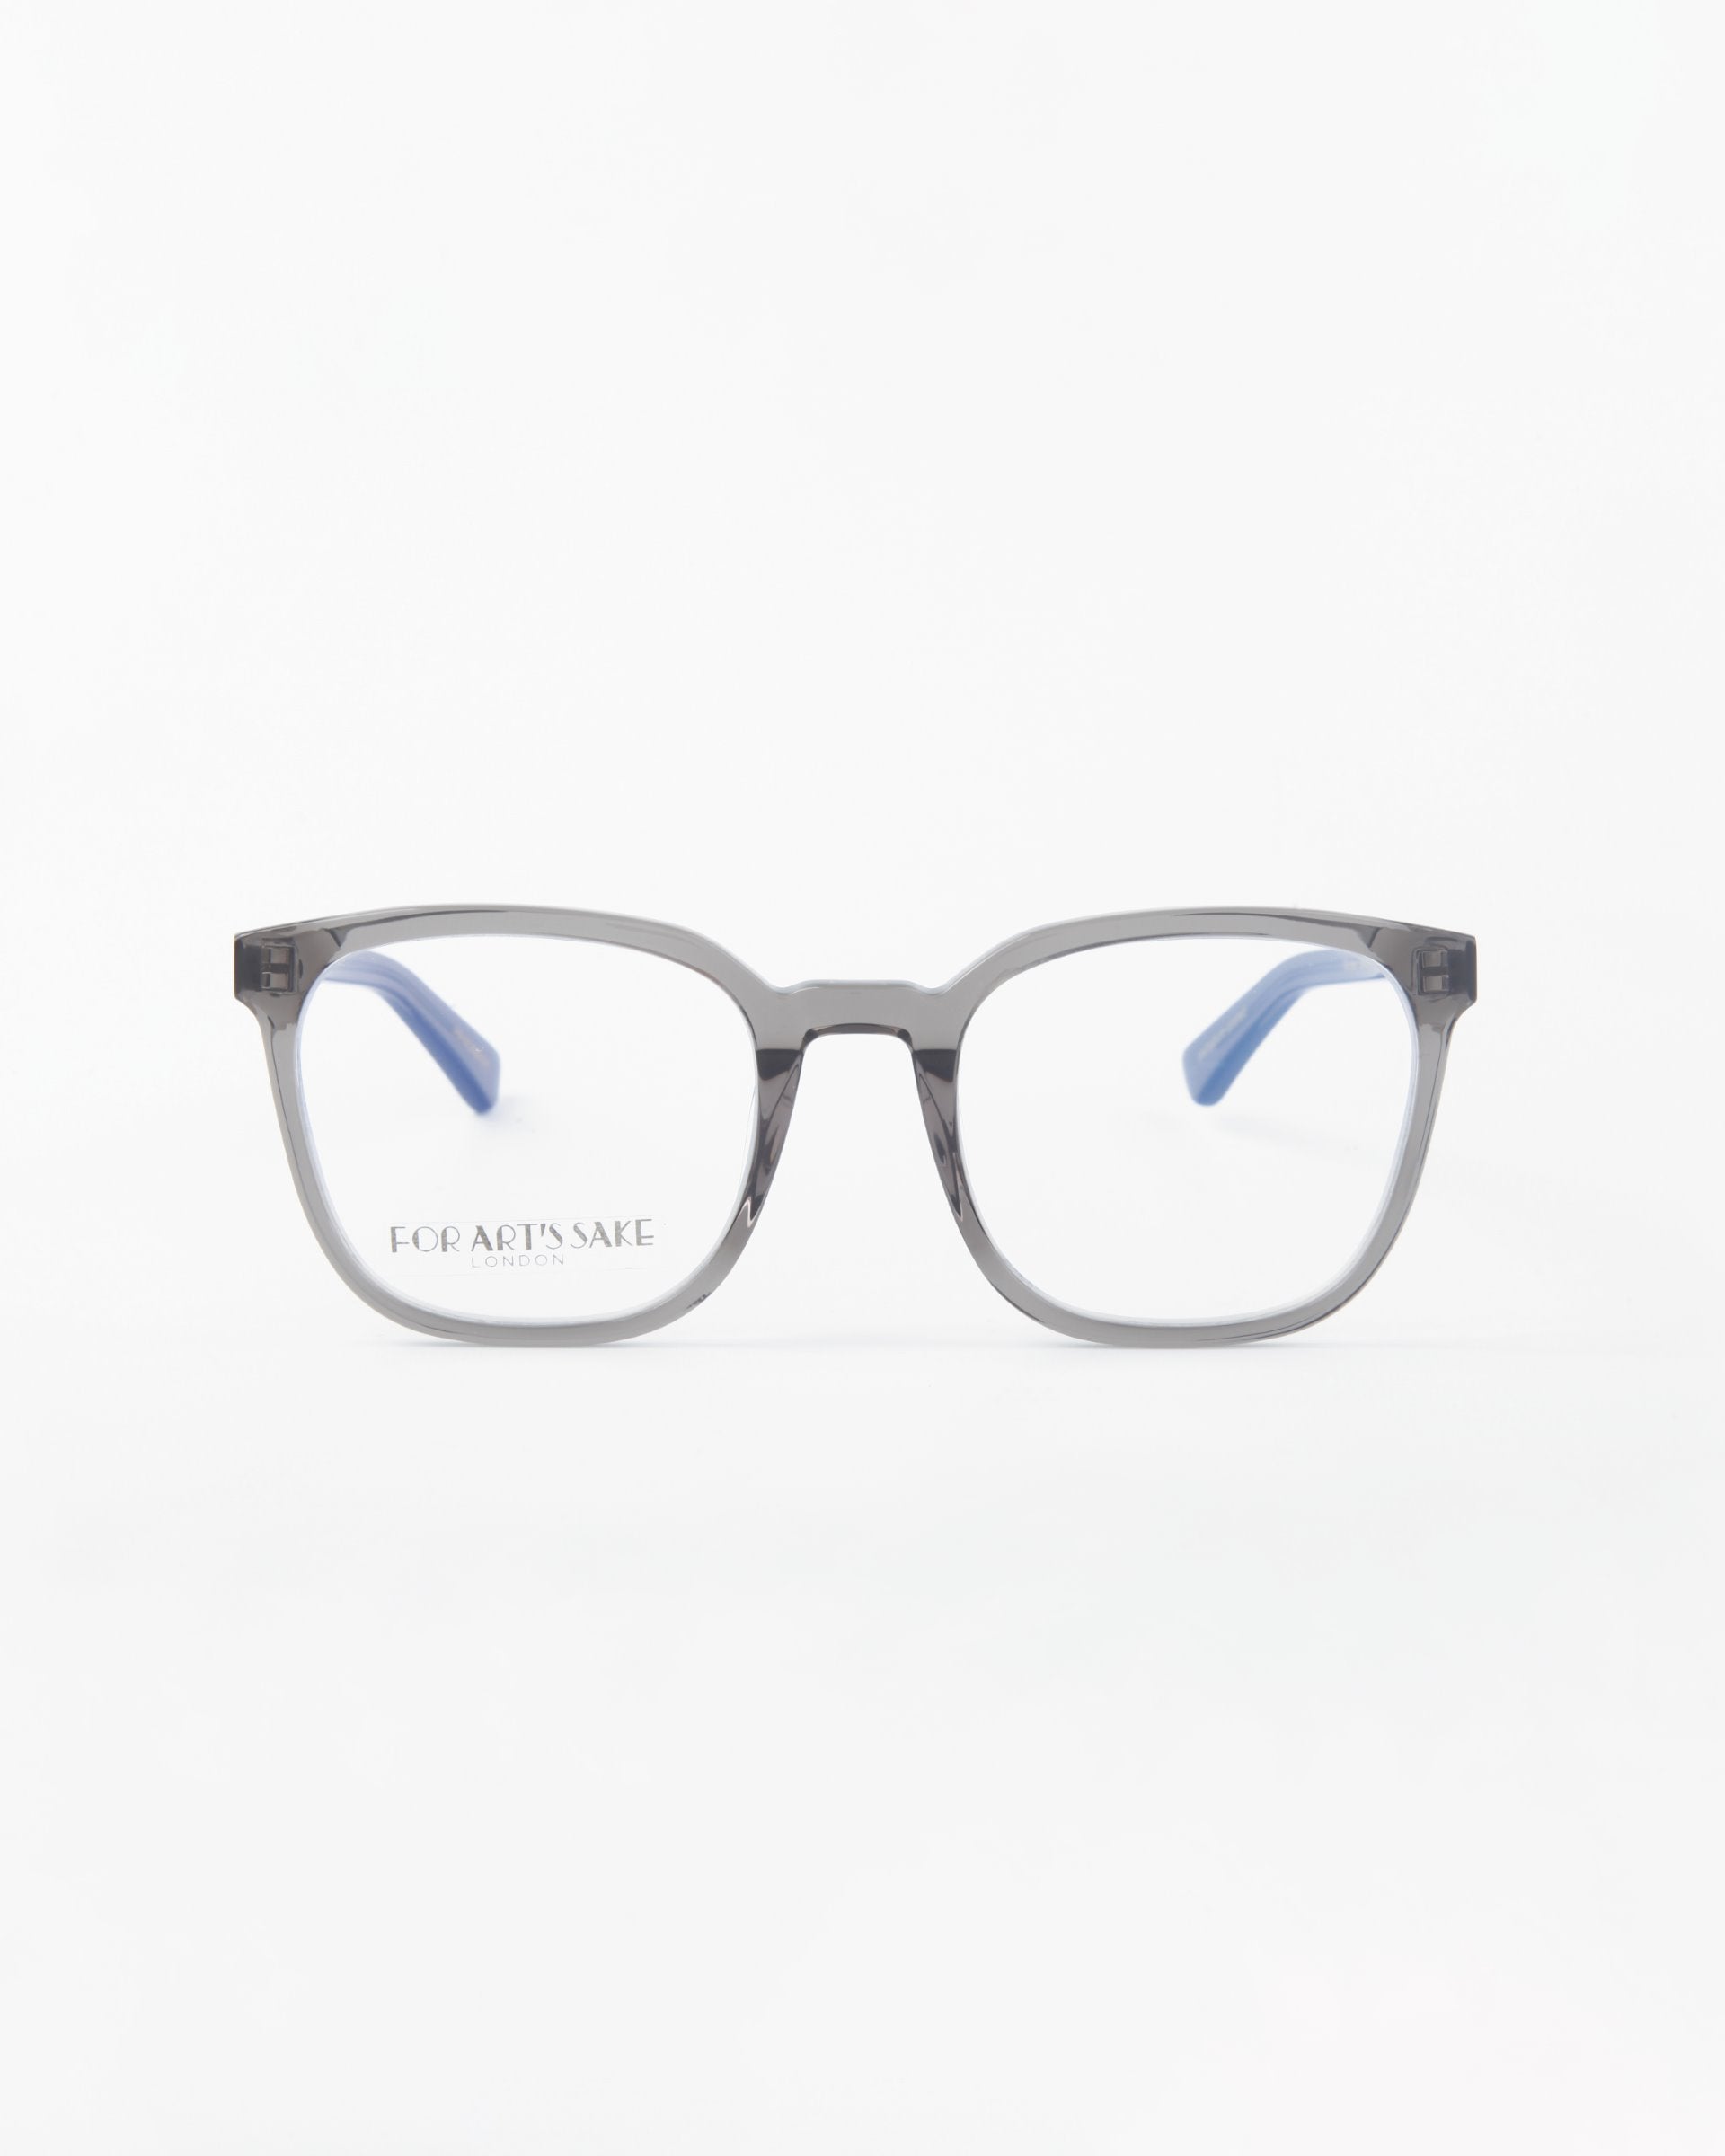 A pair of rectangular eyeglasses with transparent gray frames and light blue temple tips, placed on a white background. Made from plant-based acetate, the product name &quot;Molten&quot; and brand name &quot;For Art&#39;s Sake®&quot; are printed on the left lens.